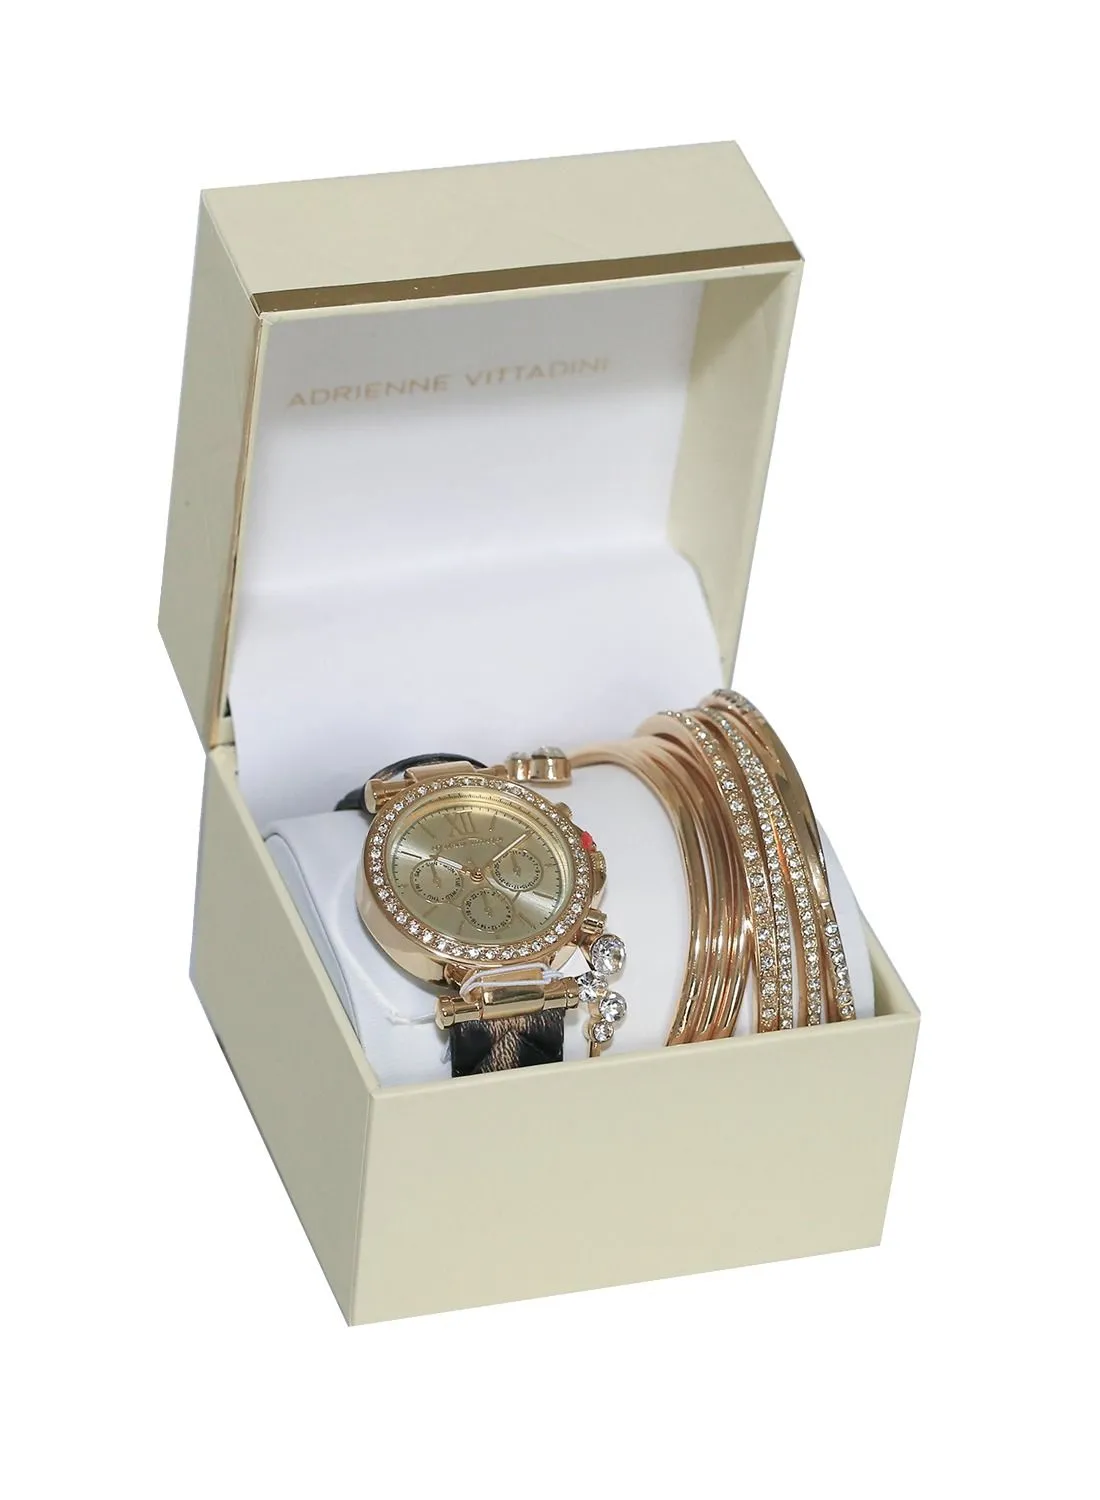 ADRIENNE VITTADINI Women's Ladies Analog Watch Gold Case with Crystals Gold Dial Animal Print Leather Strap